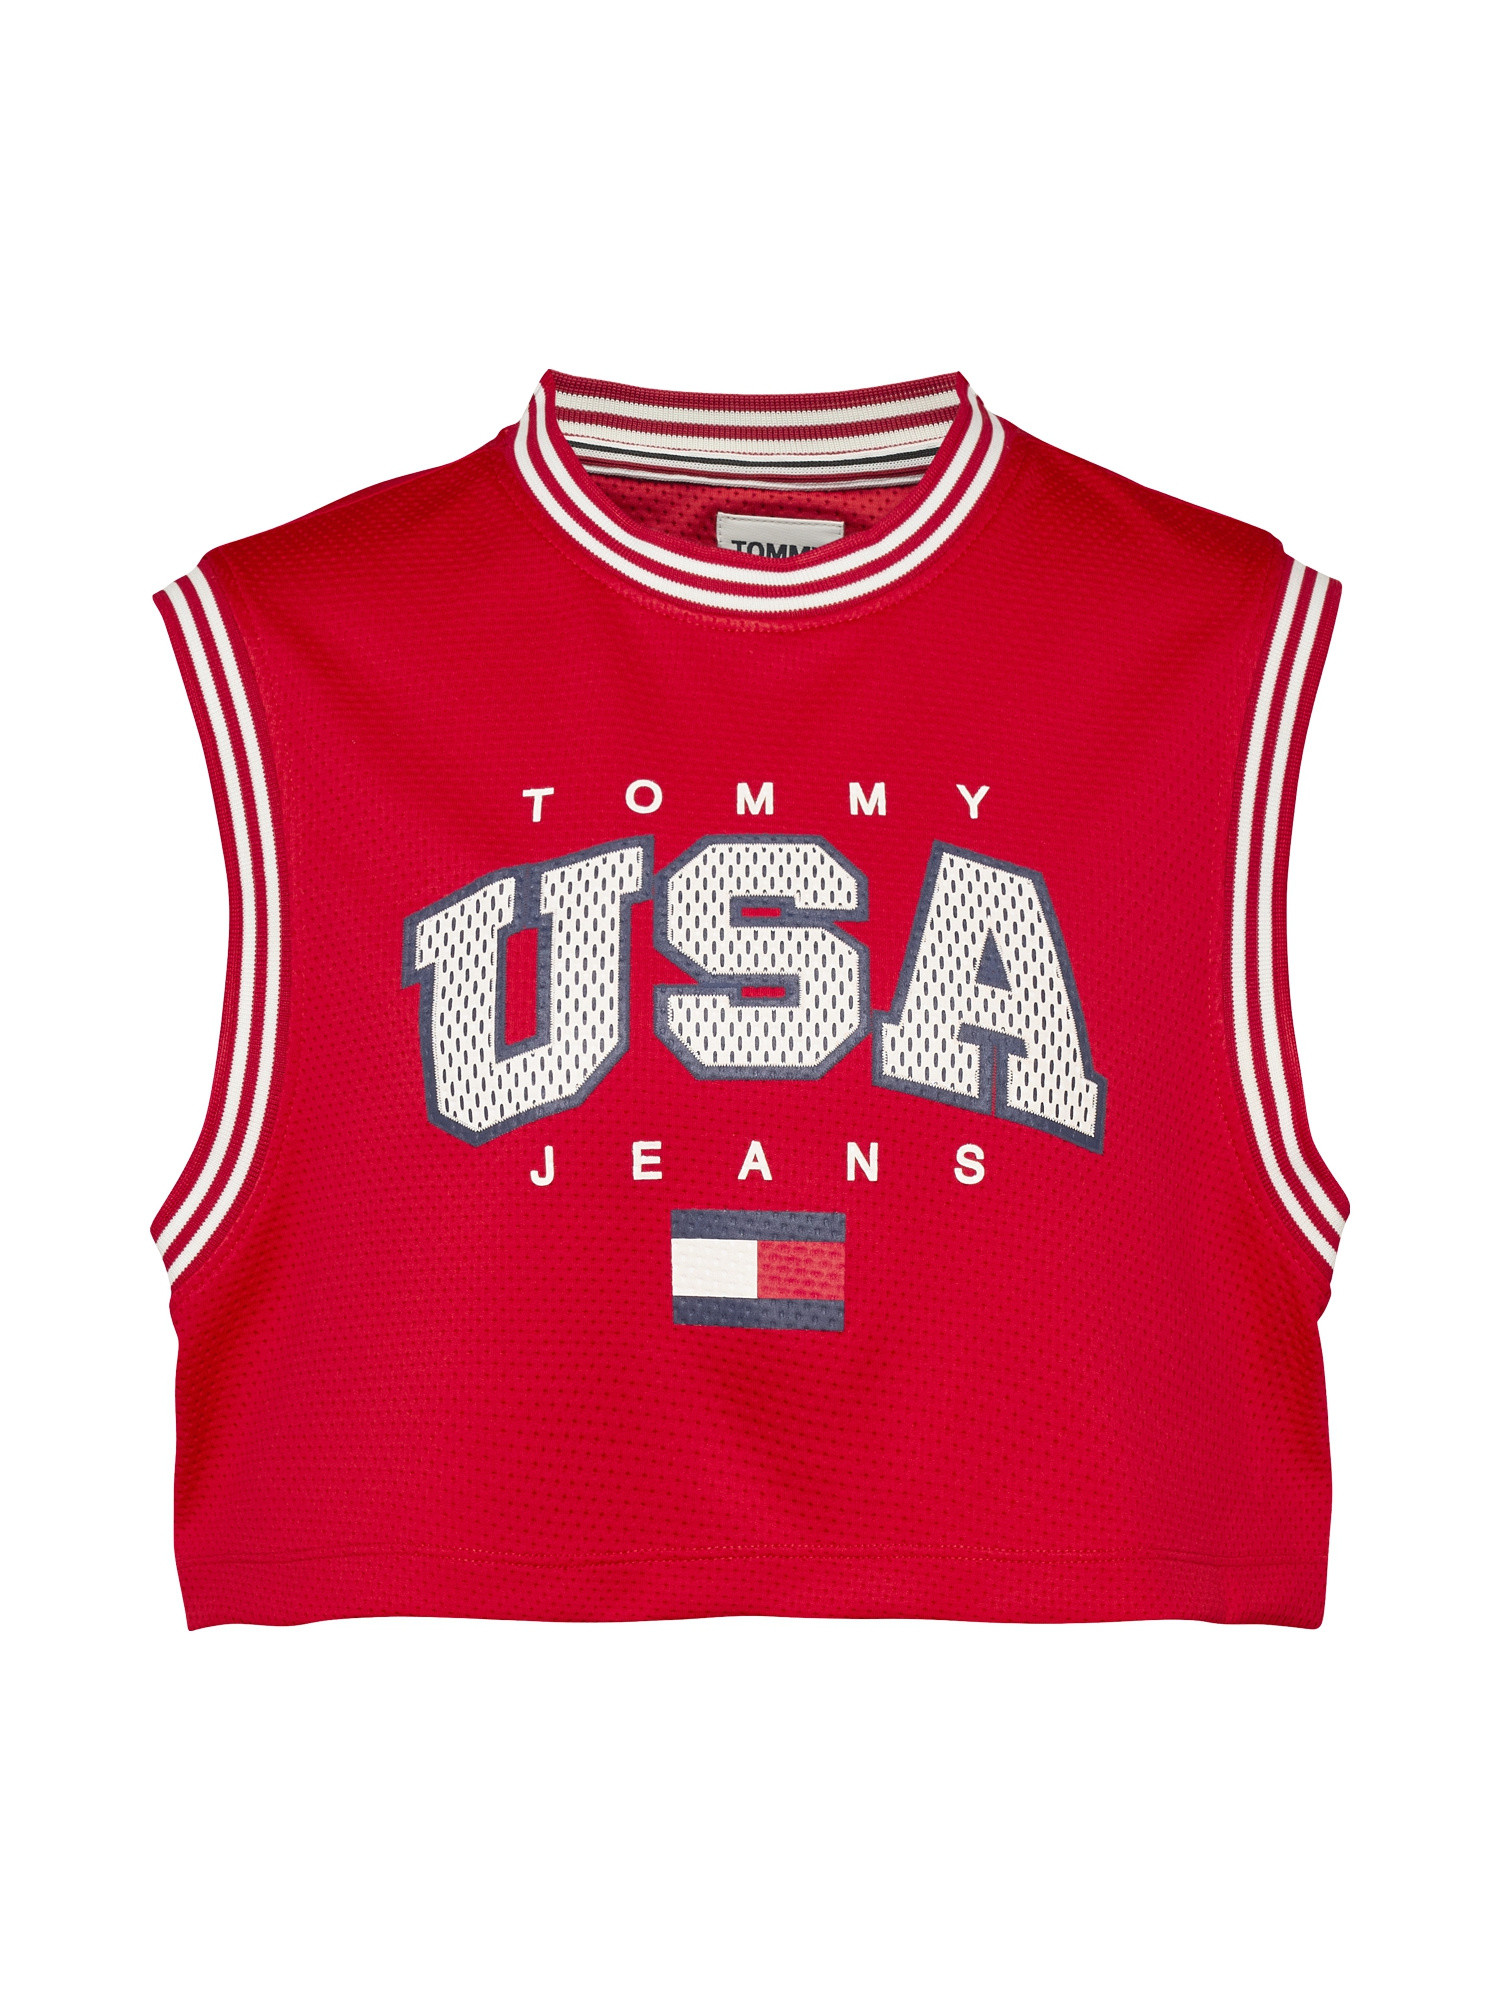 Tommy Jeans - Canotta crop, Rosso, large image number 0